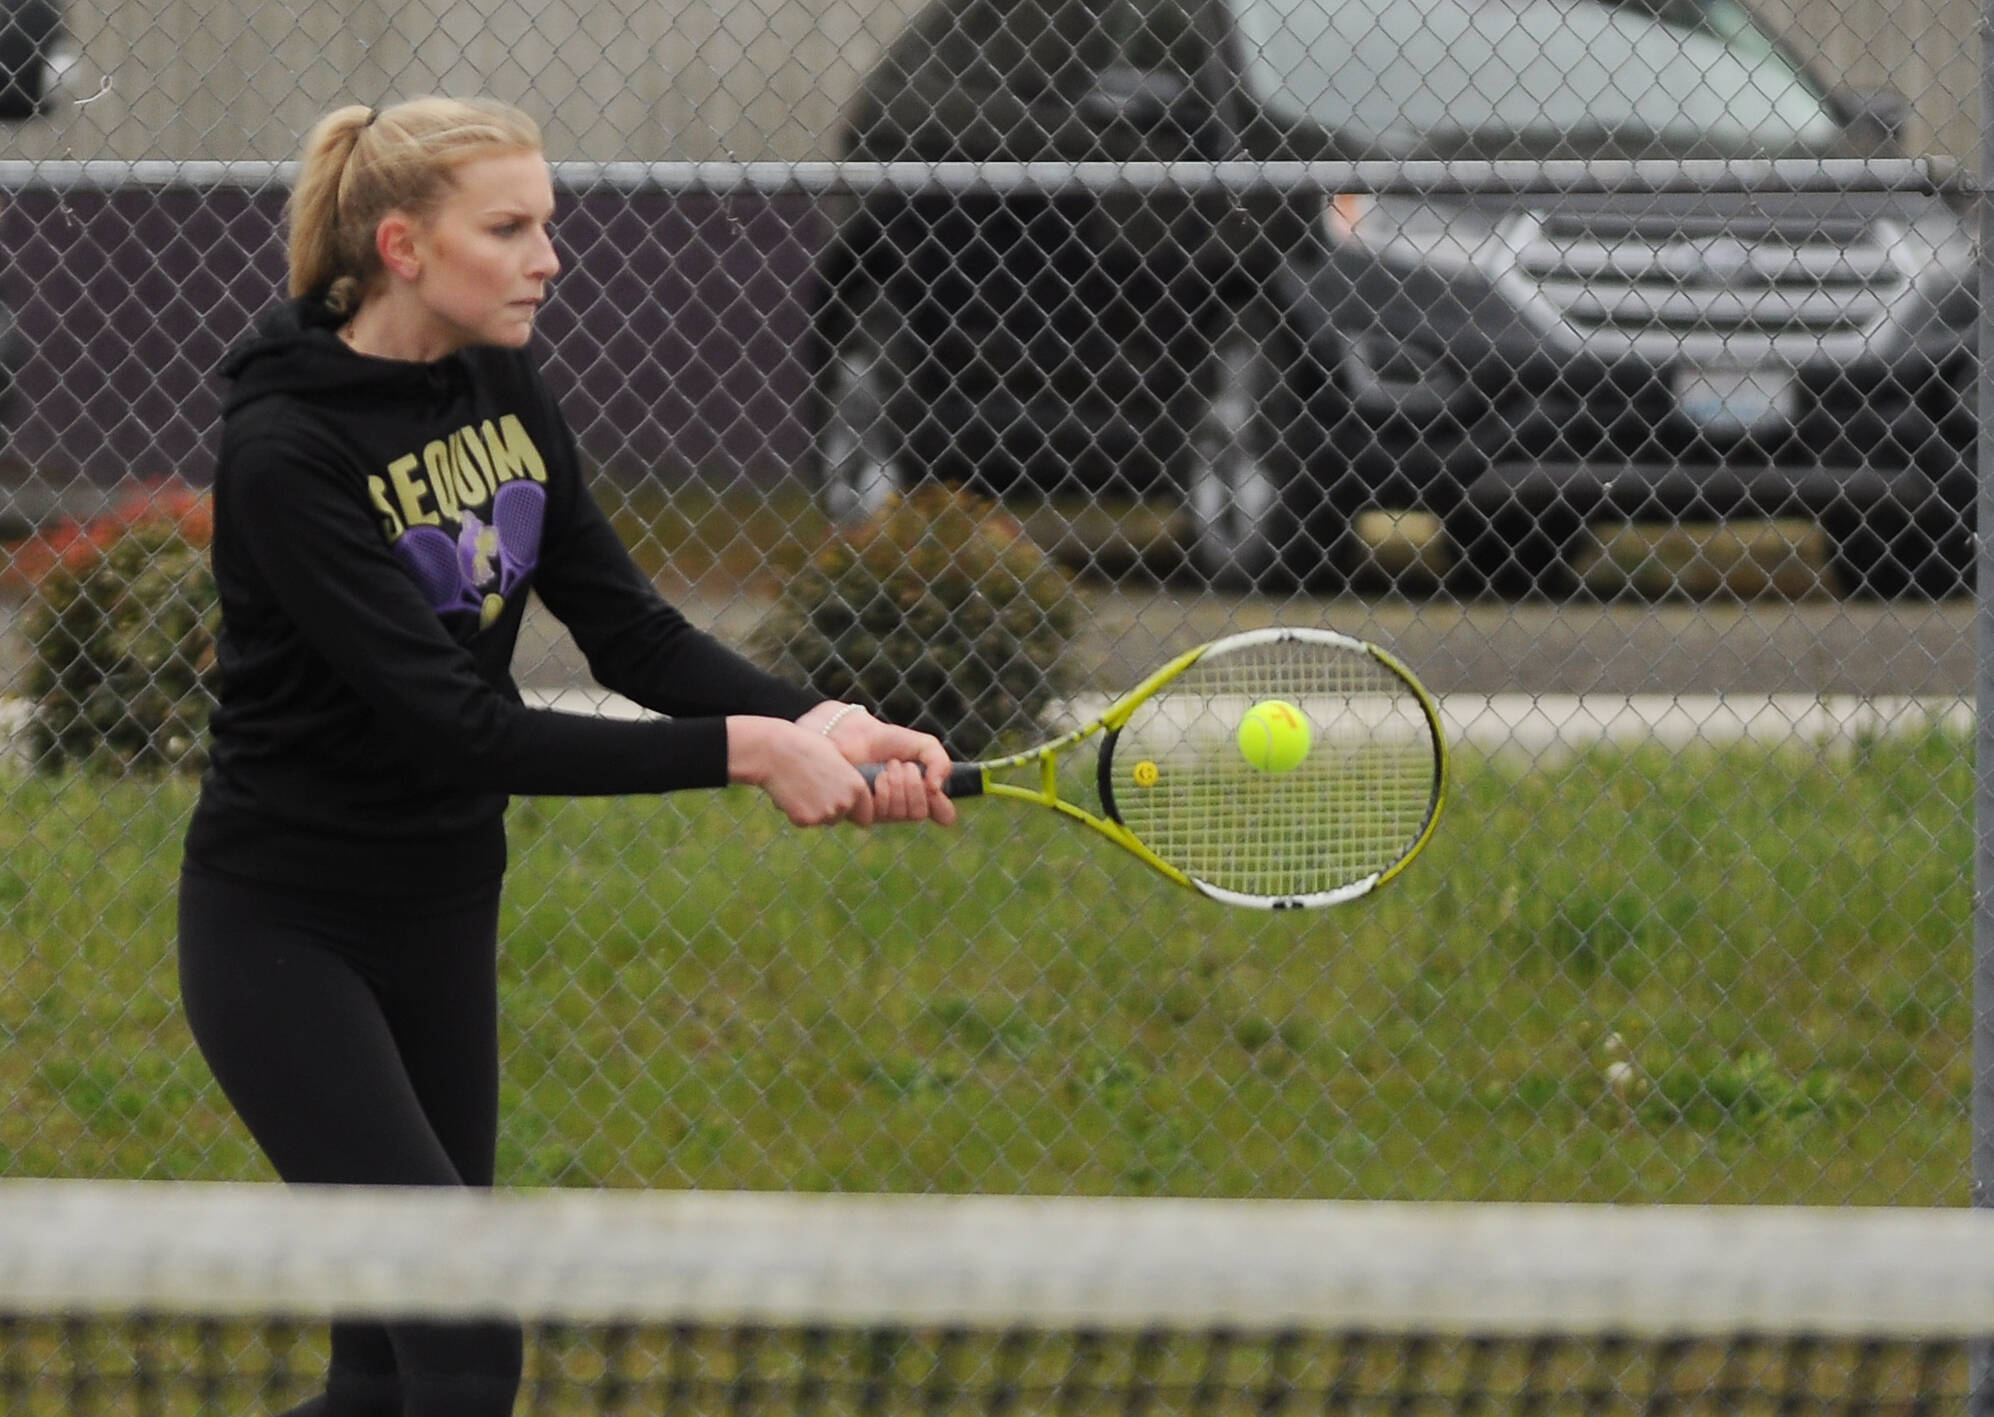 Sequim’s Kendall Hastings hits a return volley in a 6-0, 6-0 win over Kingston’s Tess Eckert on May 3. Hastings went 3-1 at the Olympic League tourney last week to advance to the West Central District tournament. Sequim Gazette photo by Michael Dashiell
Sequim’s Kendall Hastings hits a return volley in a 6-0, 6-0 win over Kingston’s Tess Eckert on May 3. Hastings went 3-1 at the Olympic League tourney last week to advance to the West Central District tournament. Sequim Gazette photo by Michael Dashiell